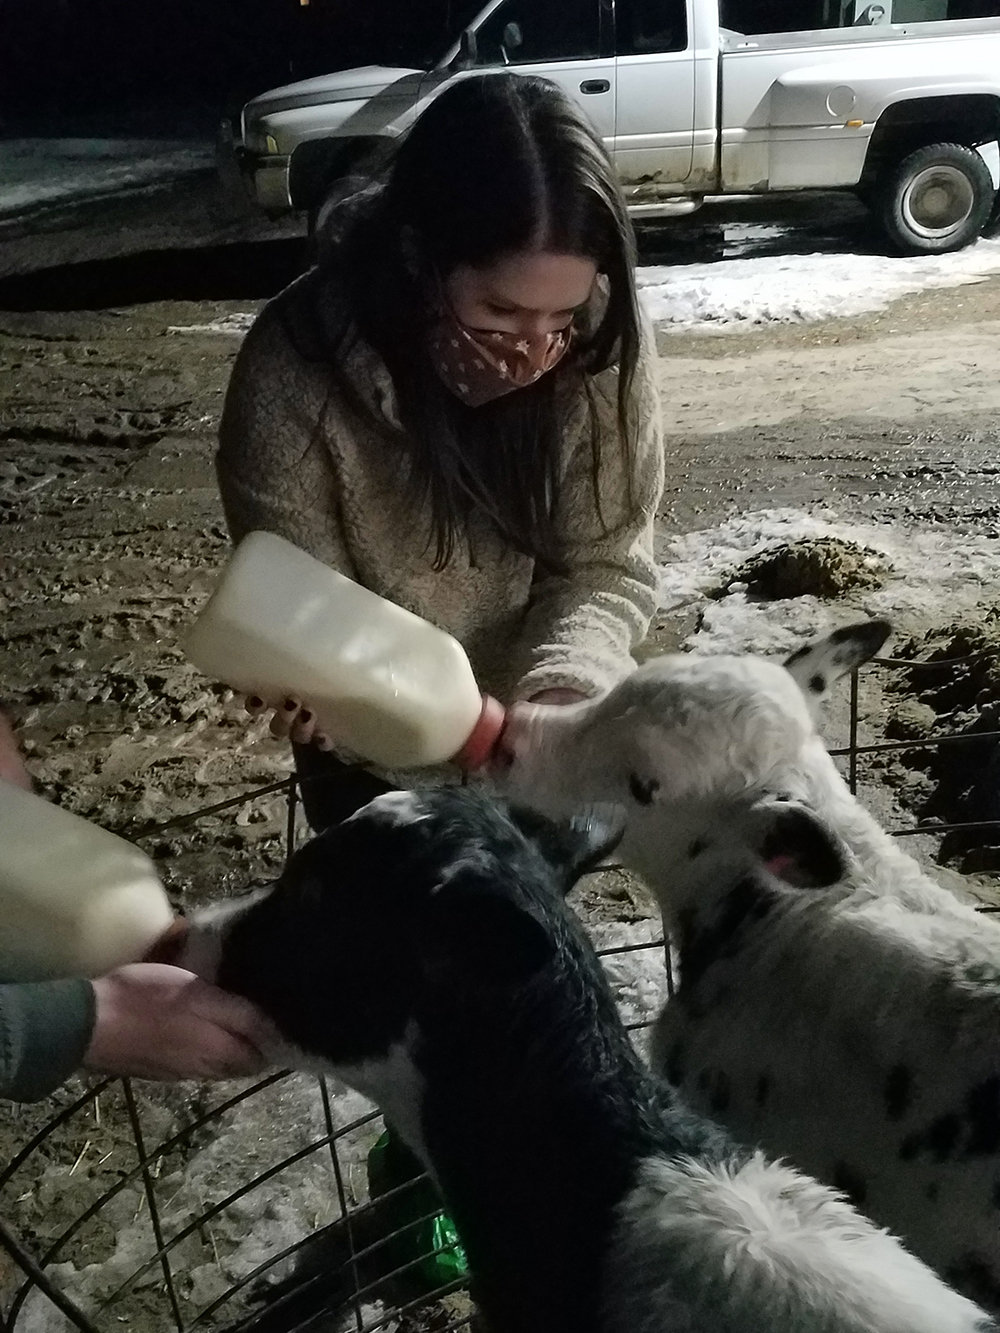 Woman bottle feeding calf at New Day Dairy in Clarksville, Iowa